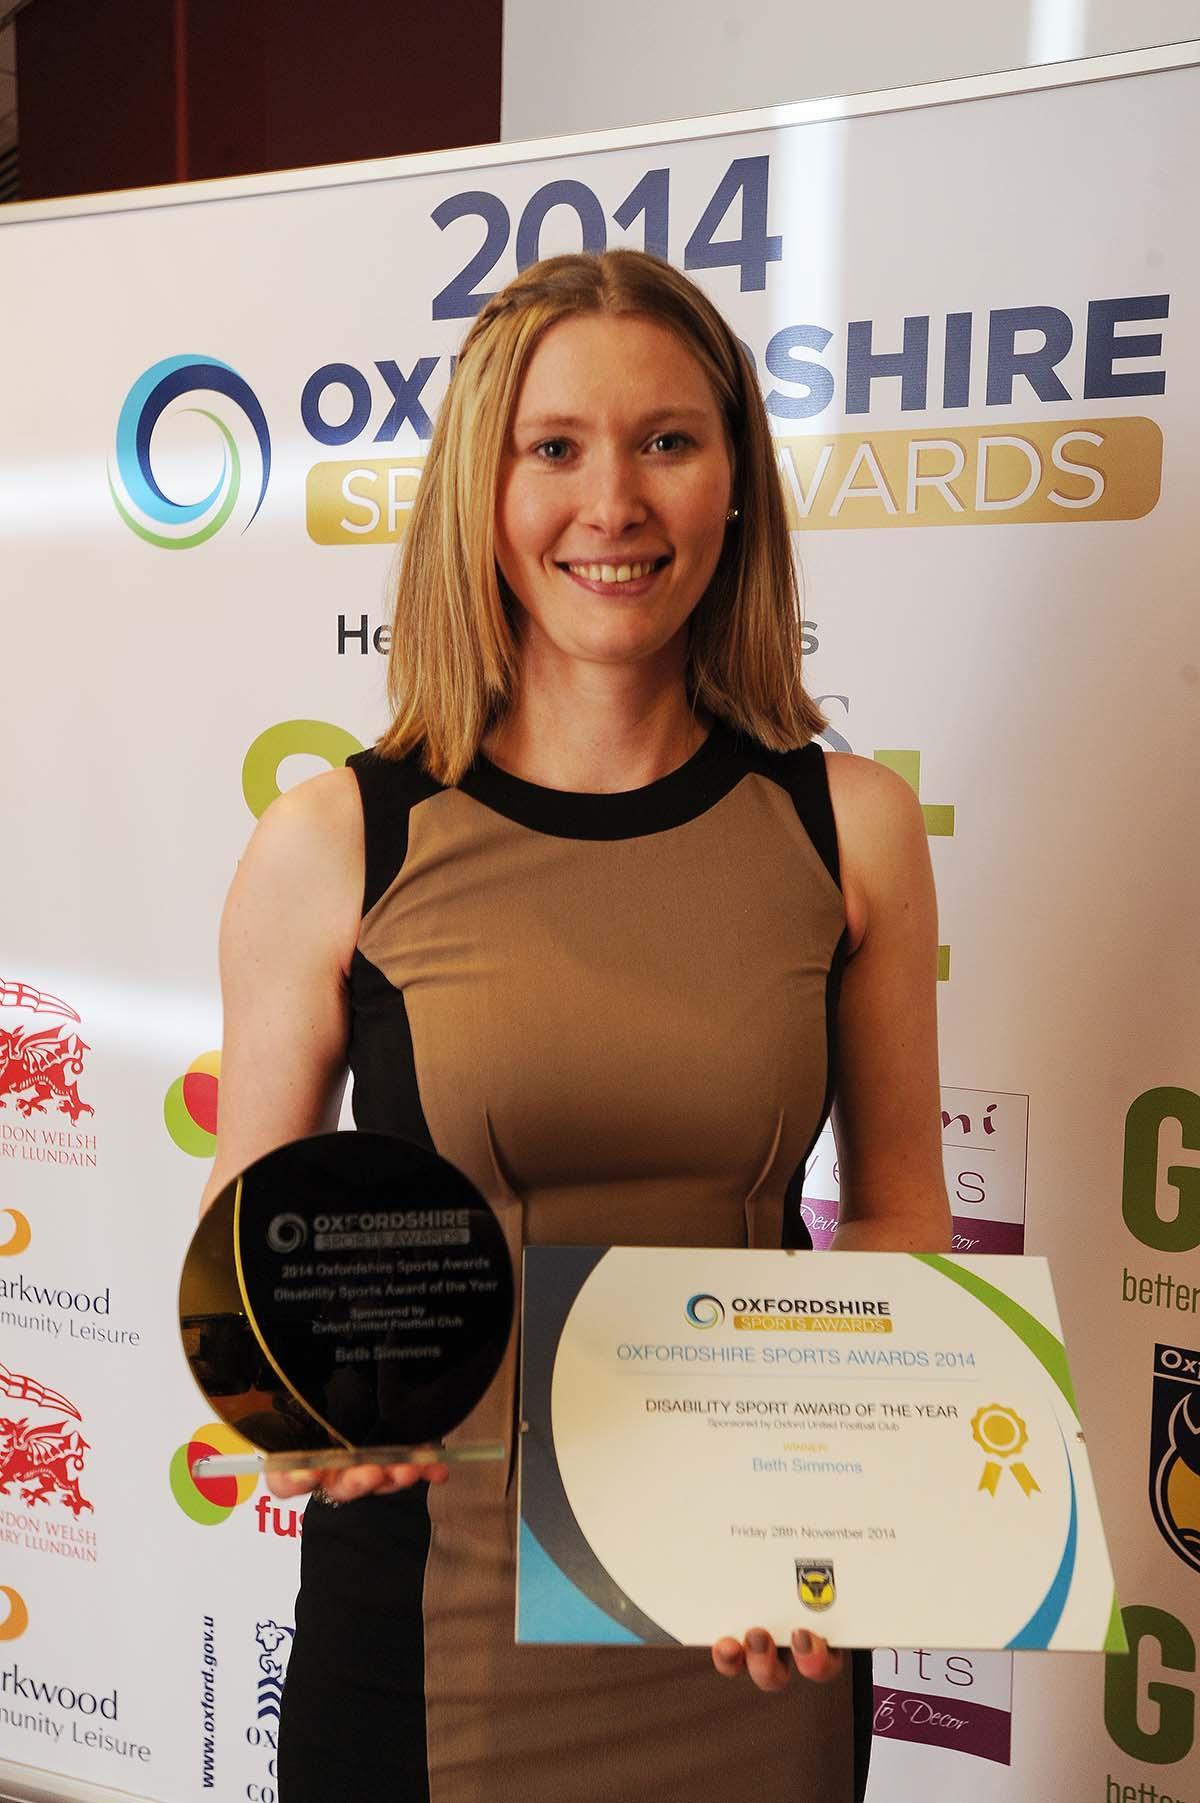 Pictured is the winner of Disability Sports Award of the Year, Beth Simmons (Tennis).
